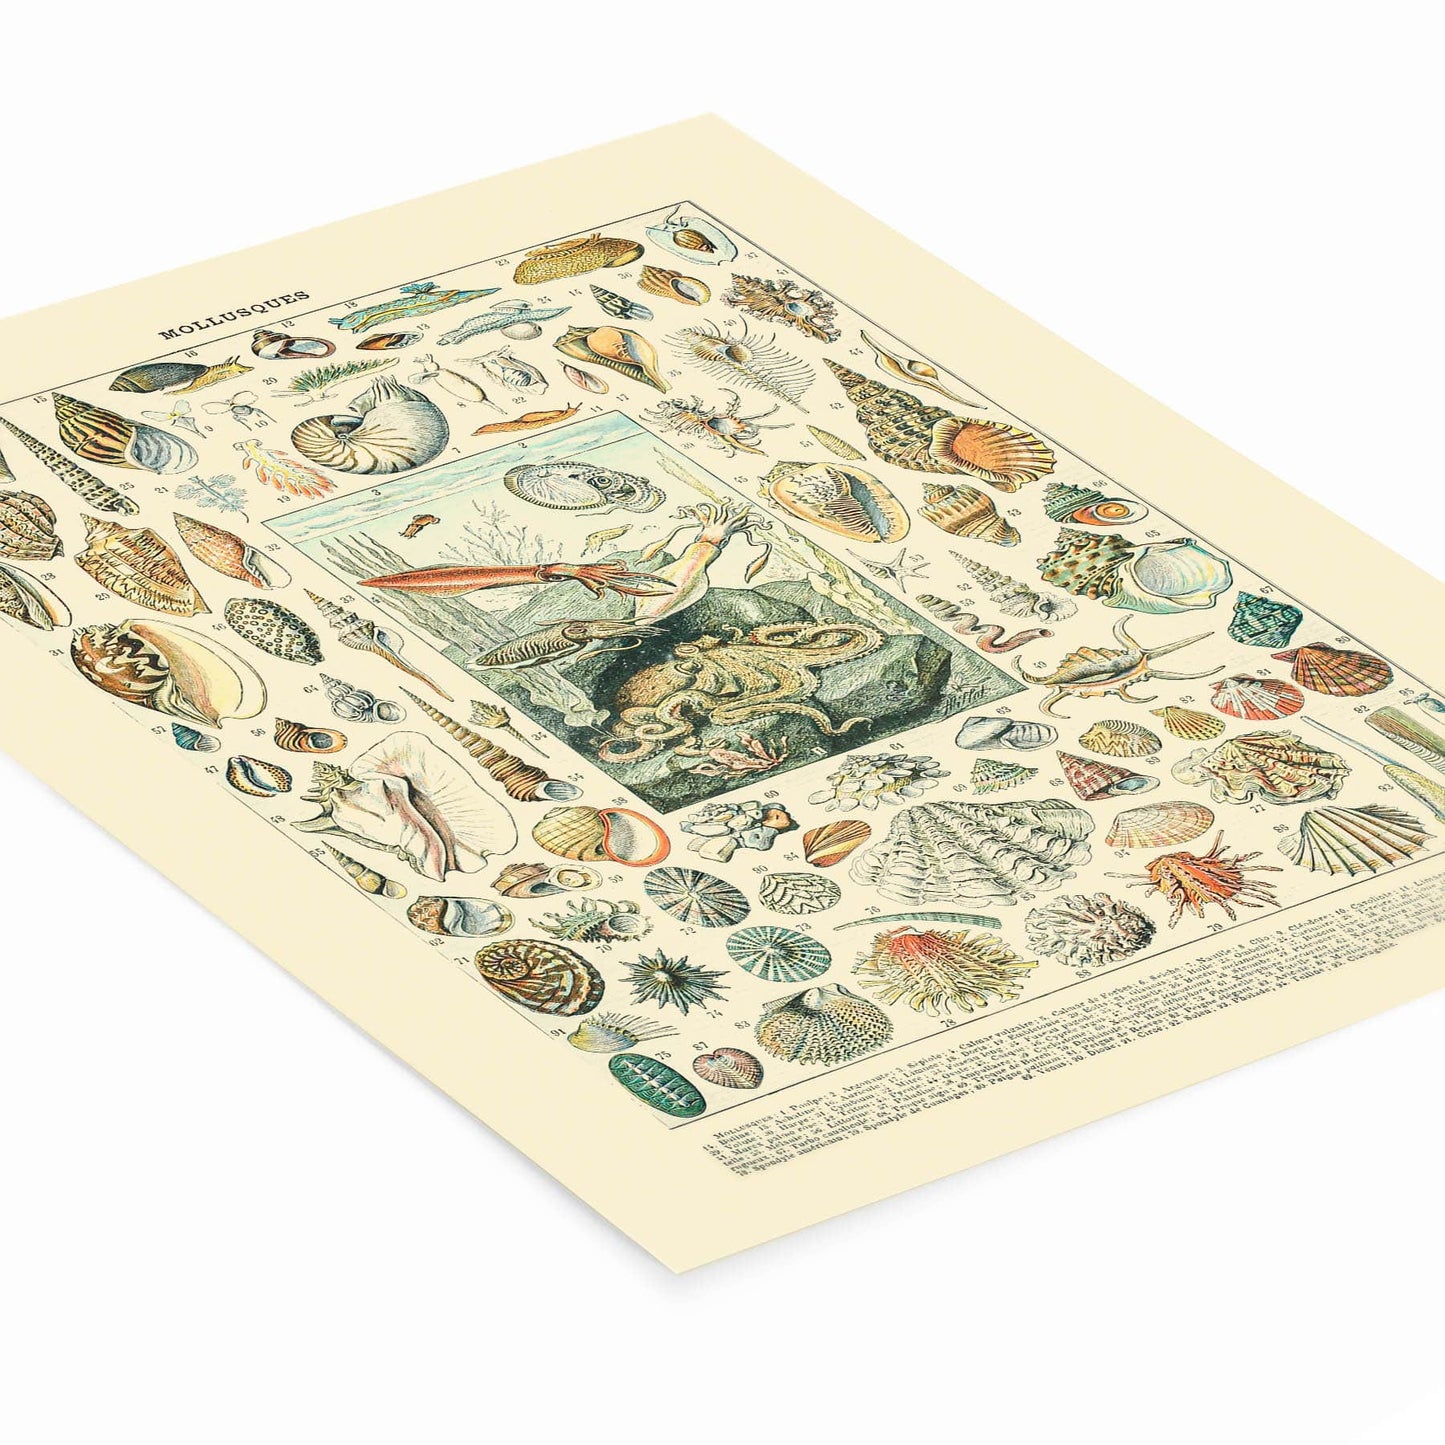 Ocean Life and Shells Painting Laying Flat on a White Background